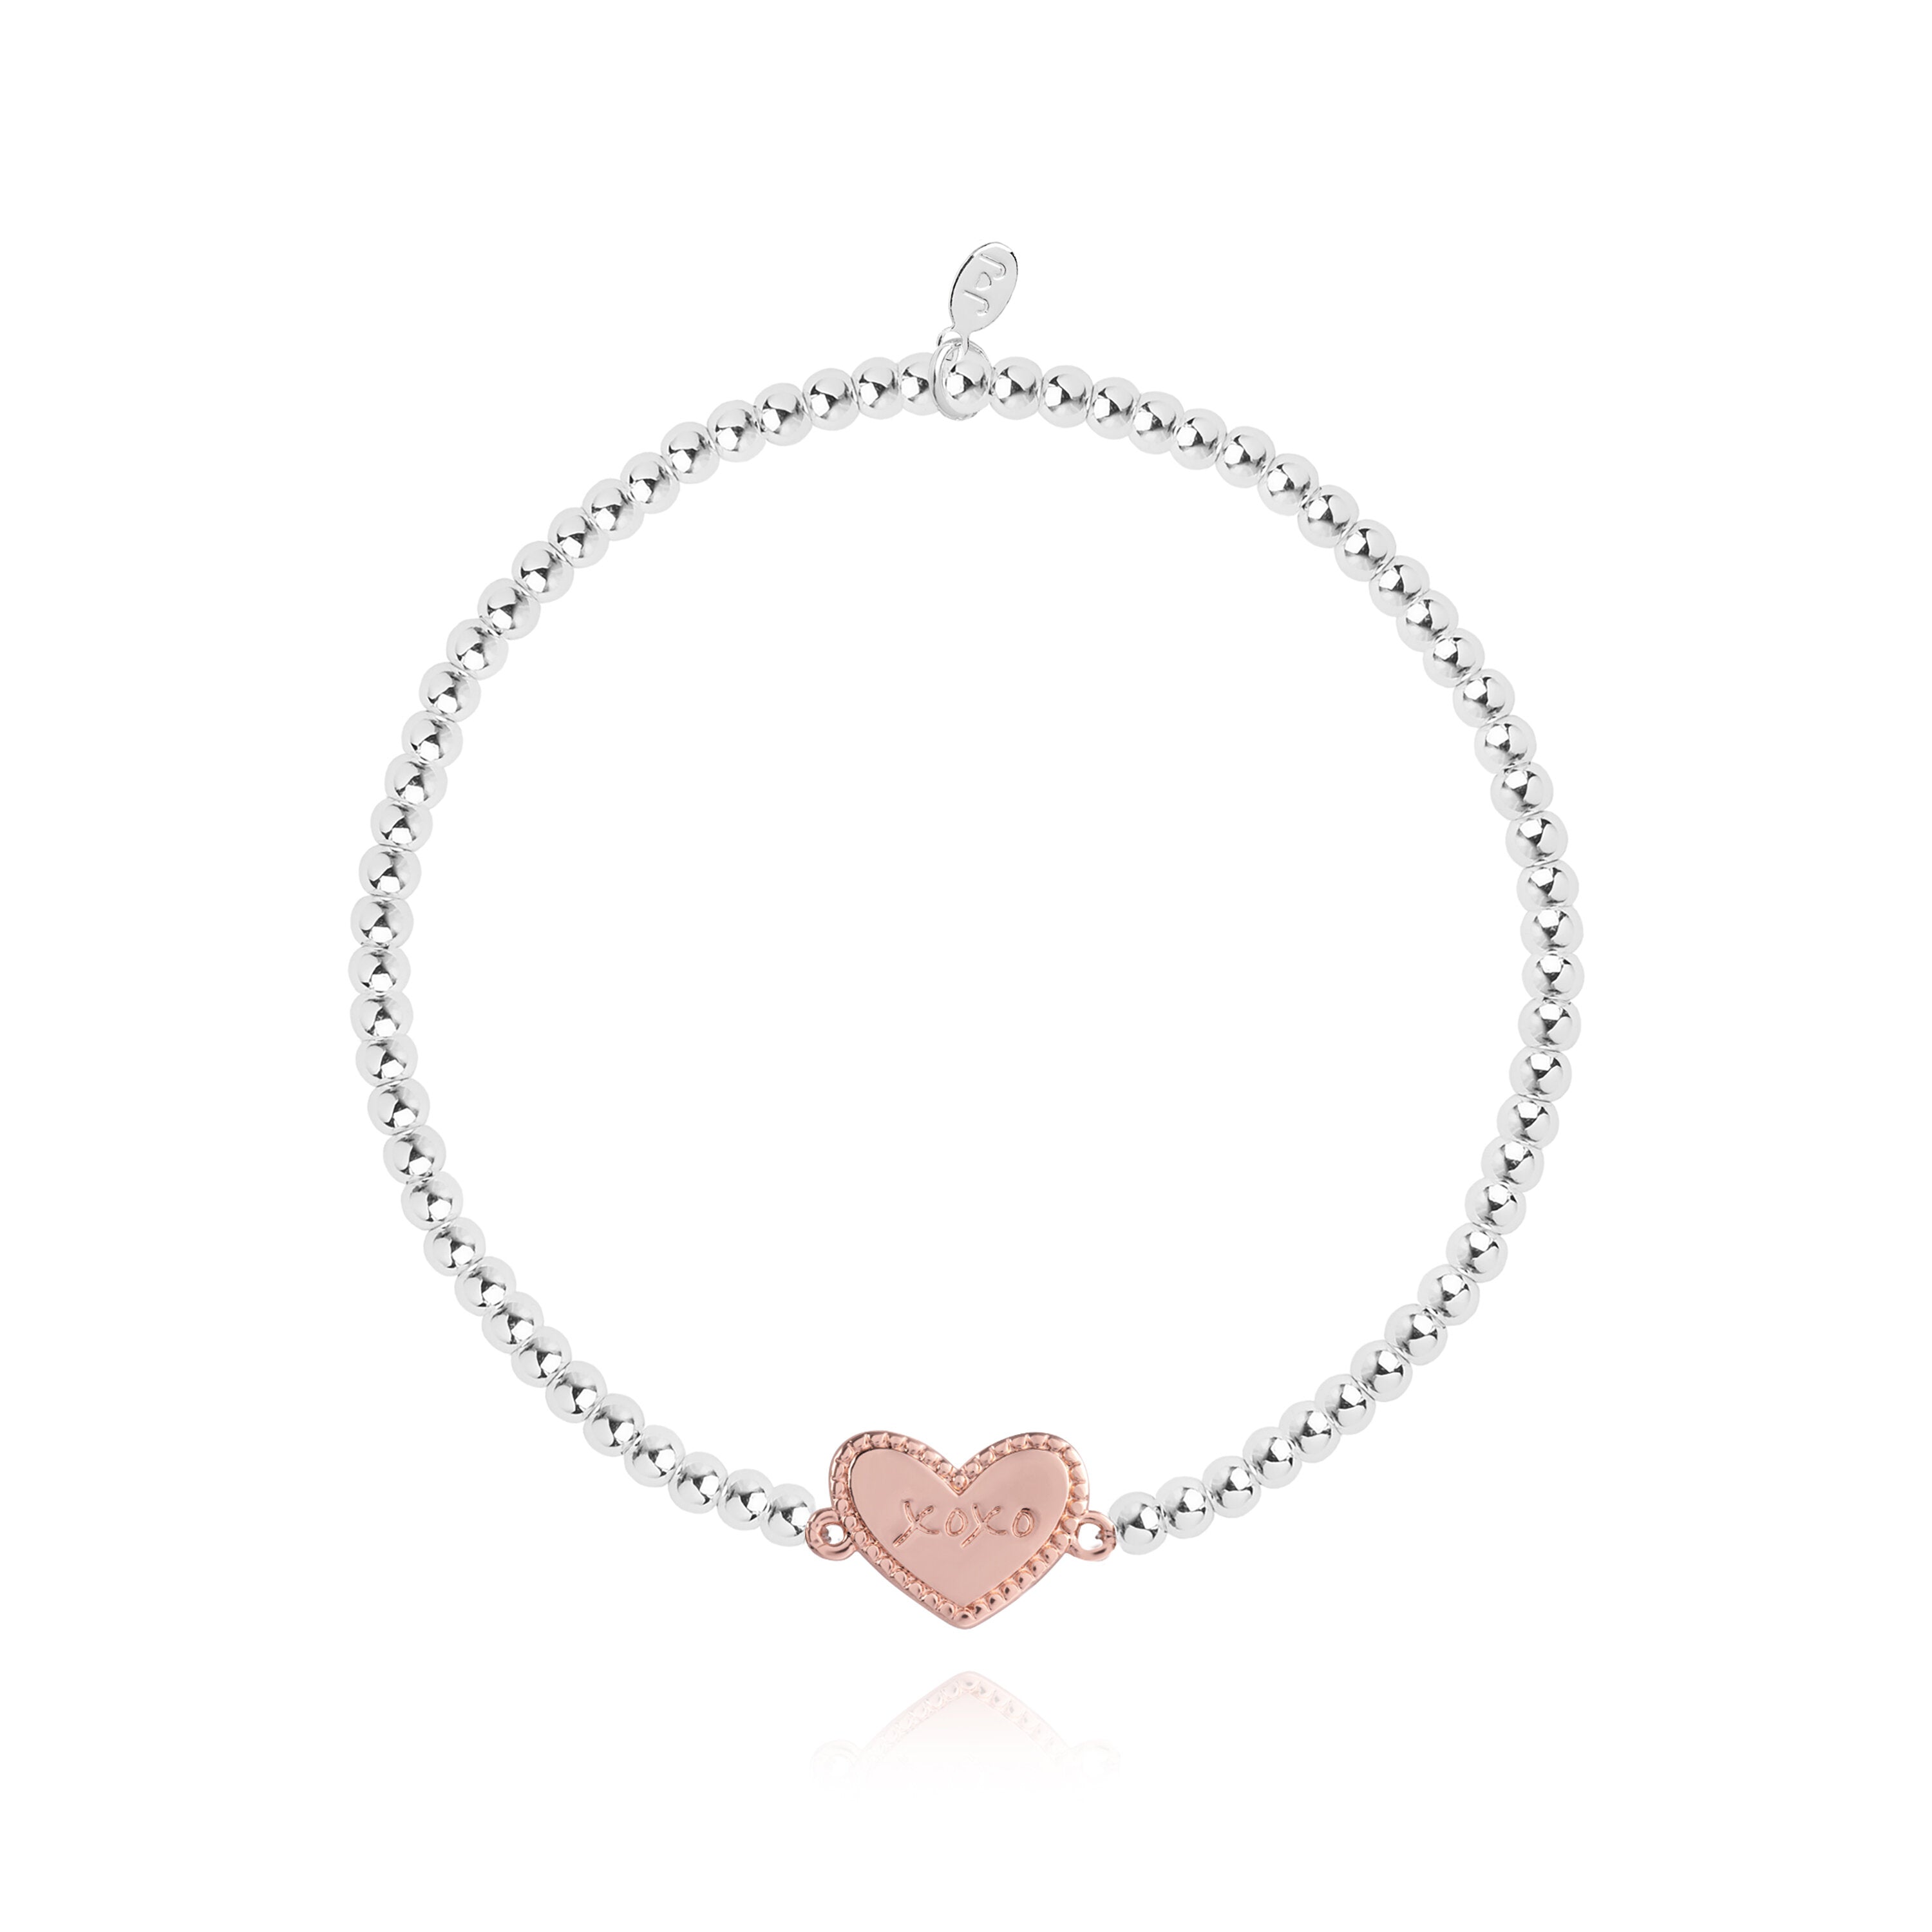 Joma Jewellery A Little Hugs, Kisses and Birthday Wishes Bracelet